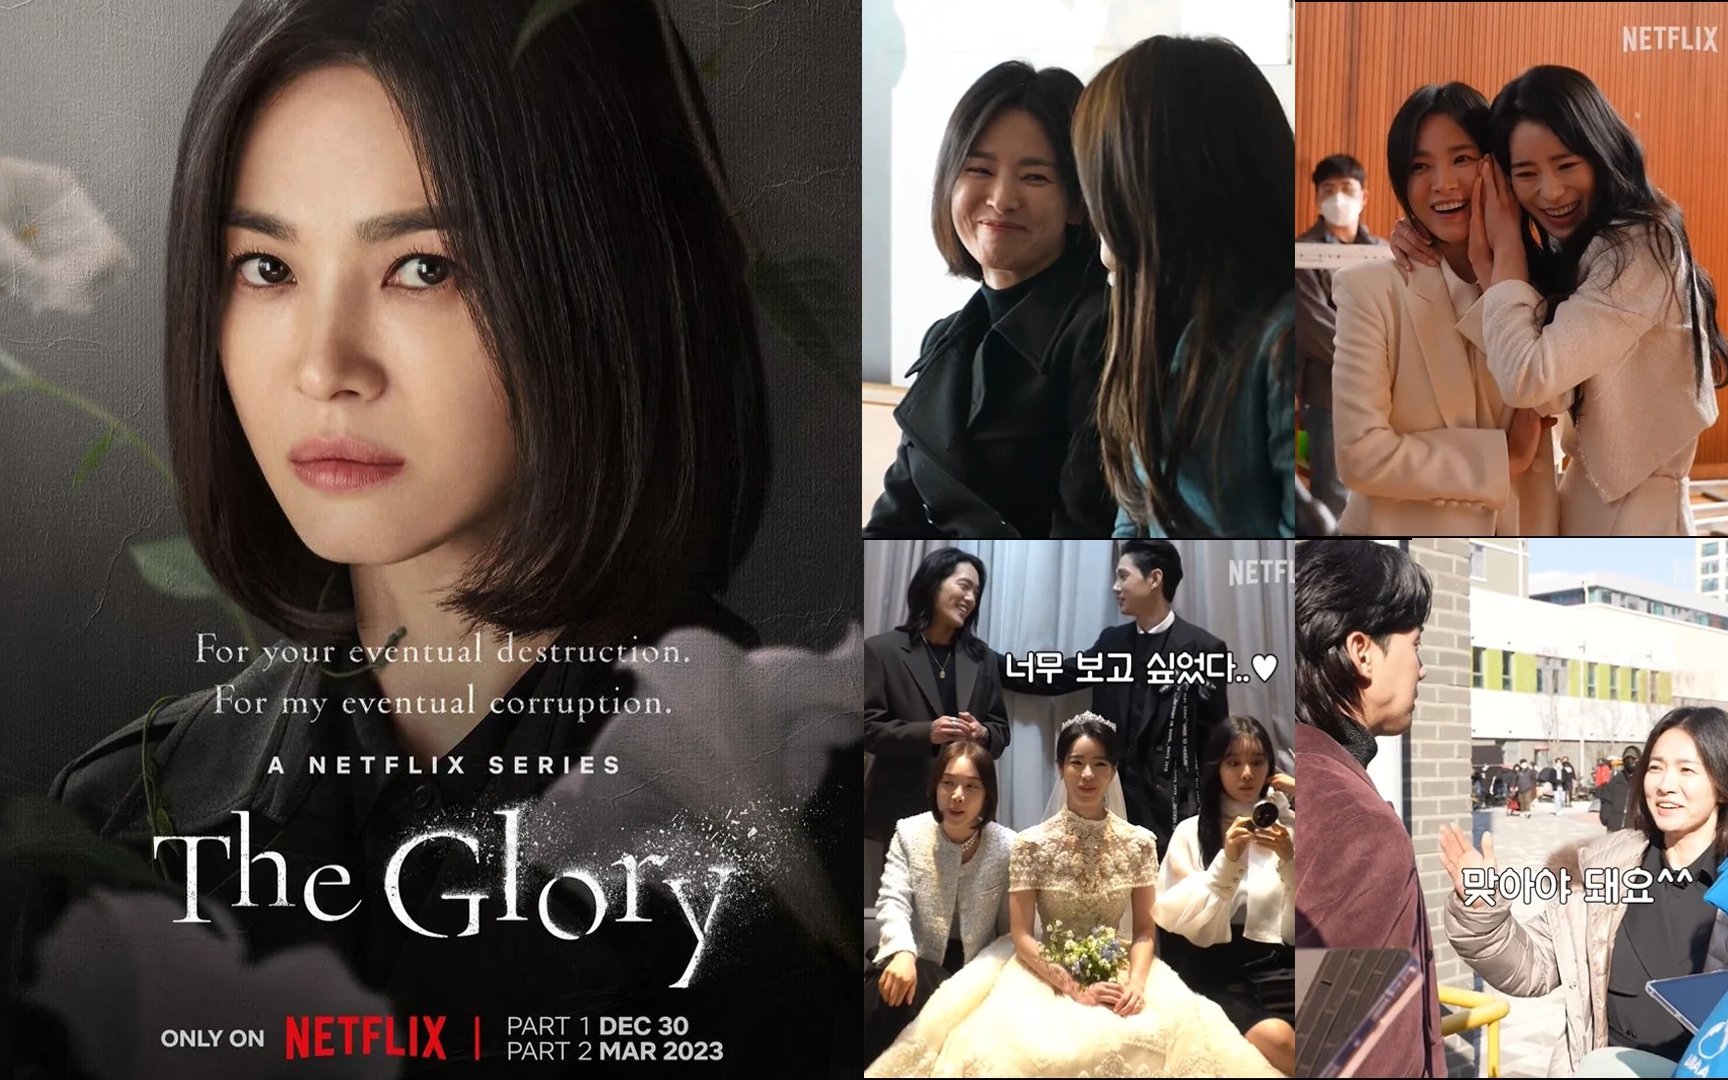 Netflix Korea reveals how the actors interacted off camera in the latest behind-the-scenes video of 'The Glory' | allkpop